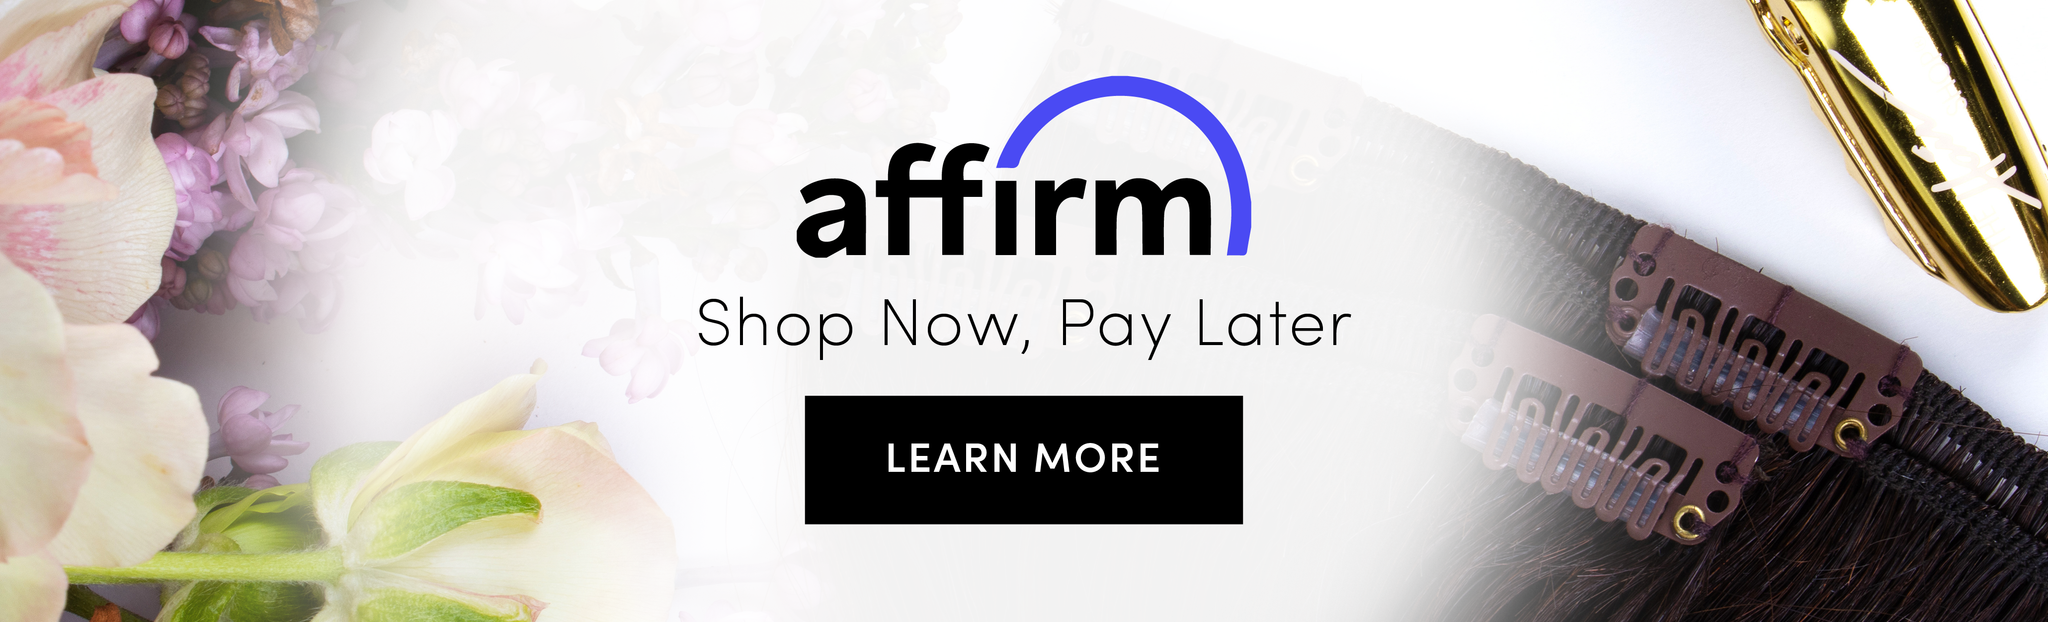 Affirm, shop now, pay later